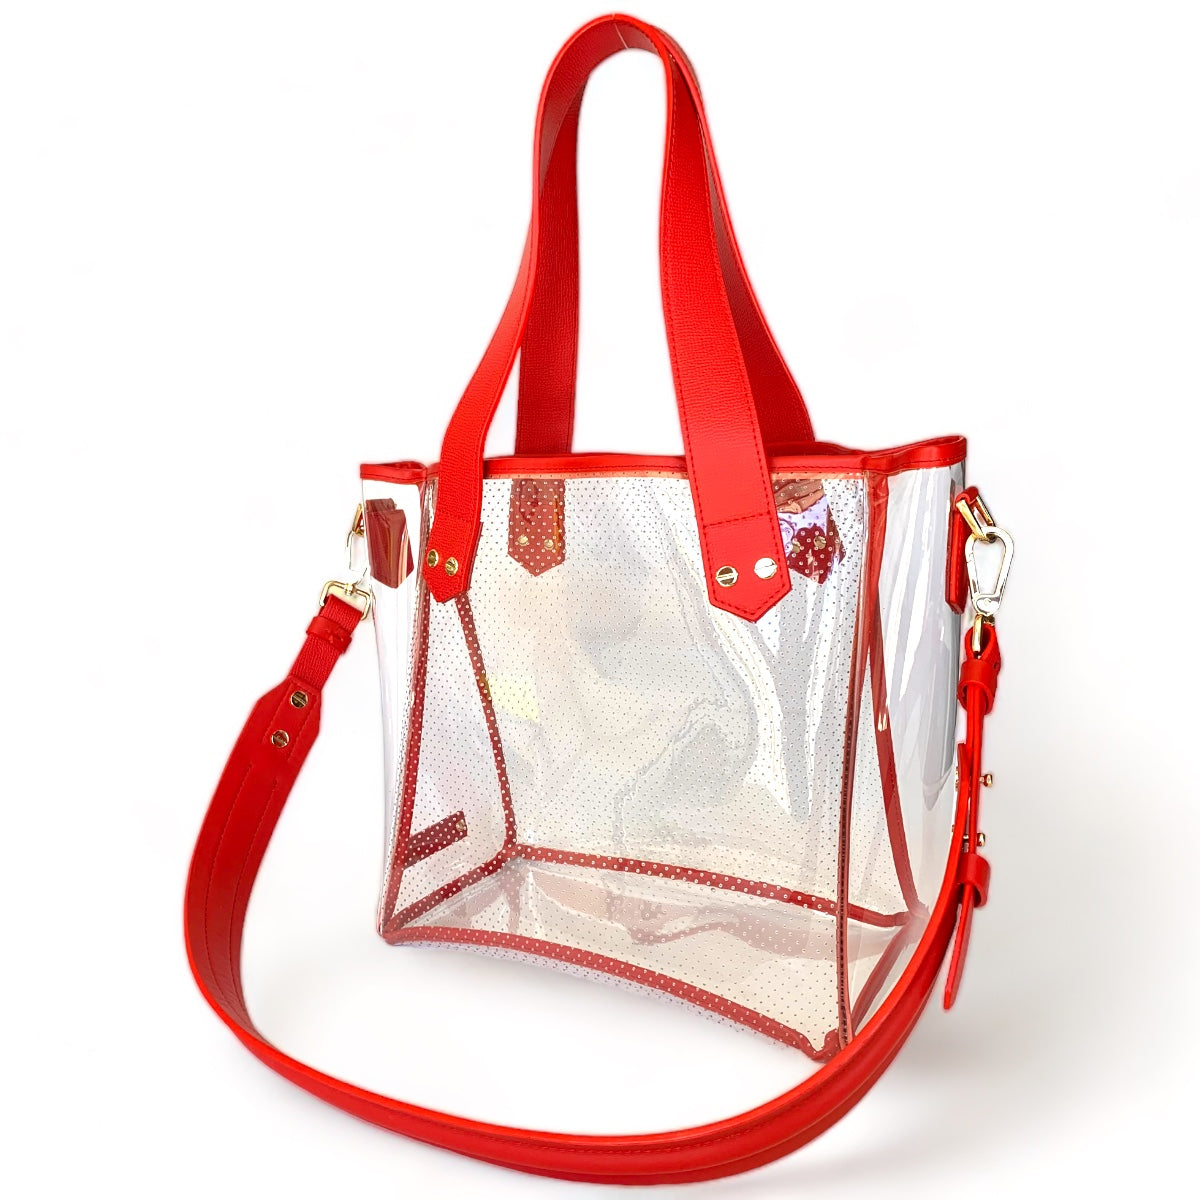 Gameday Bag - Red Leather / Clear PVC